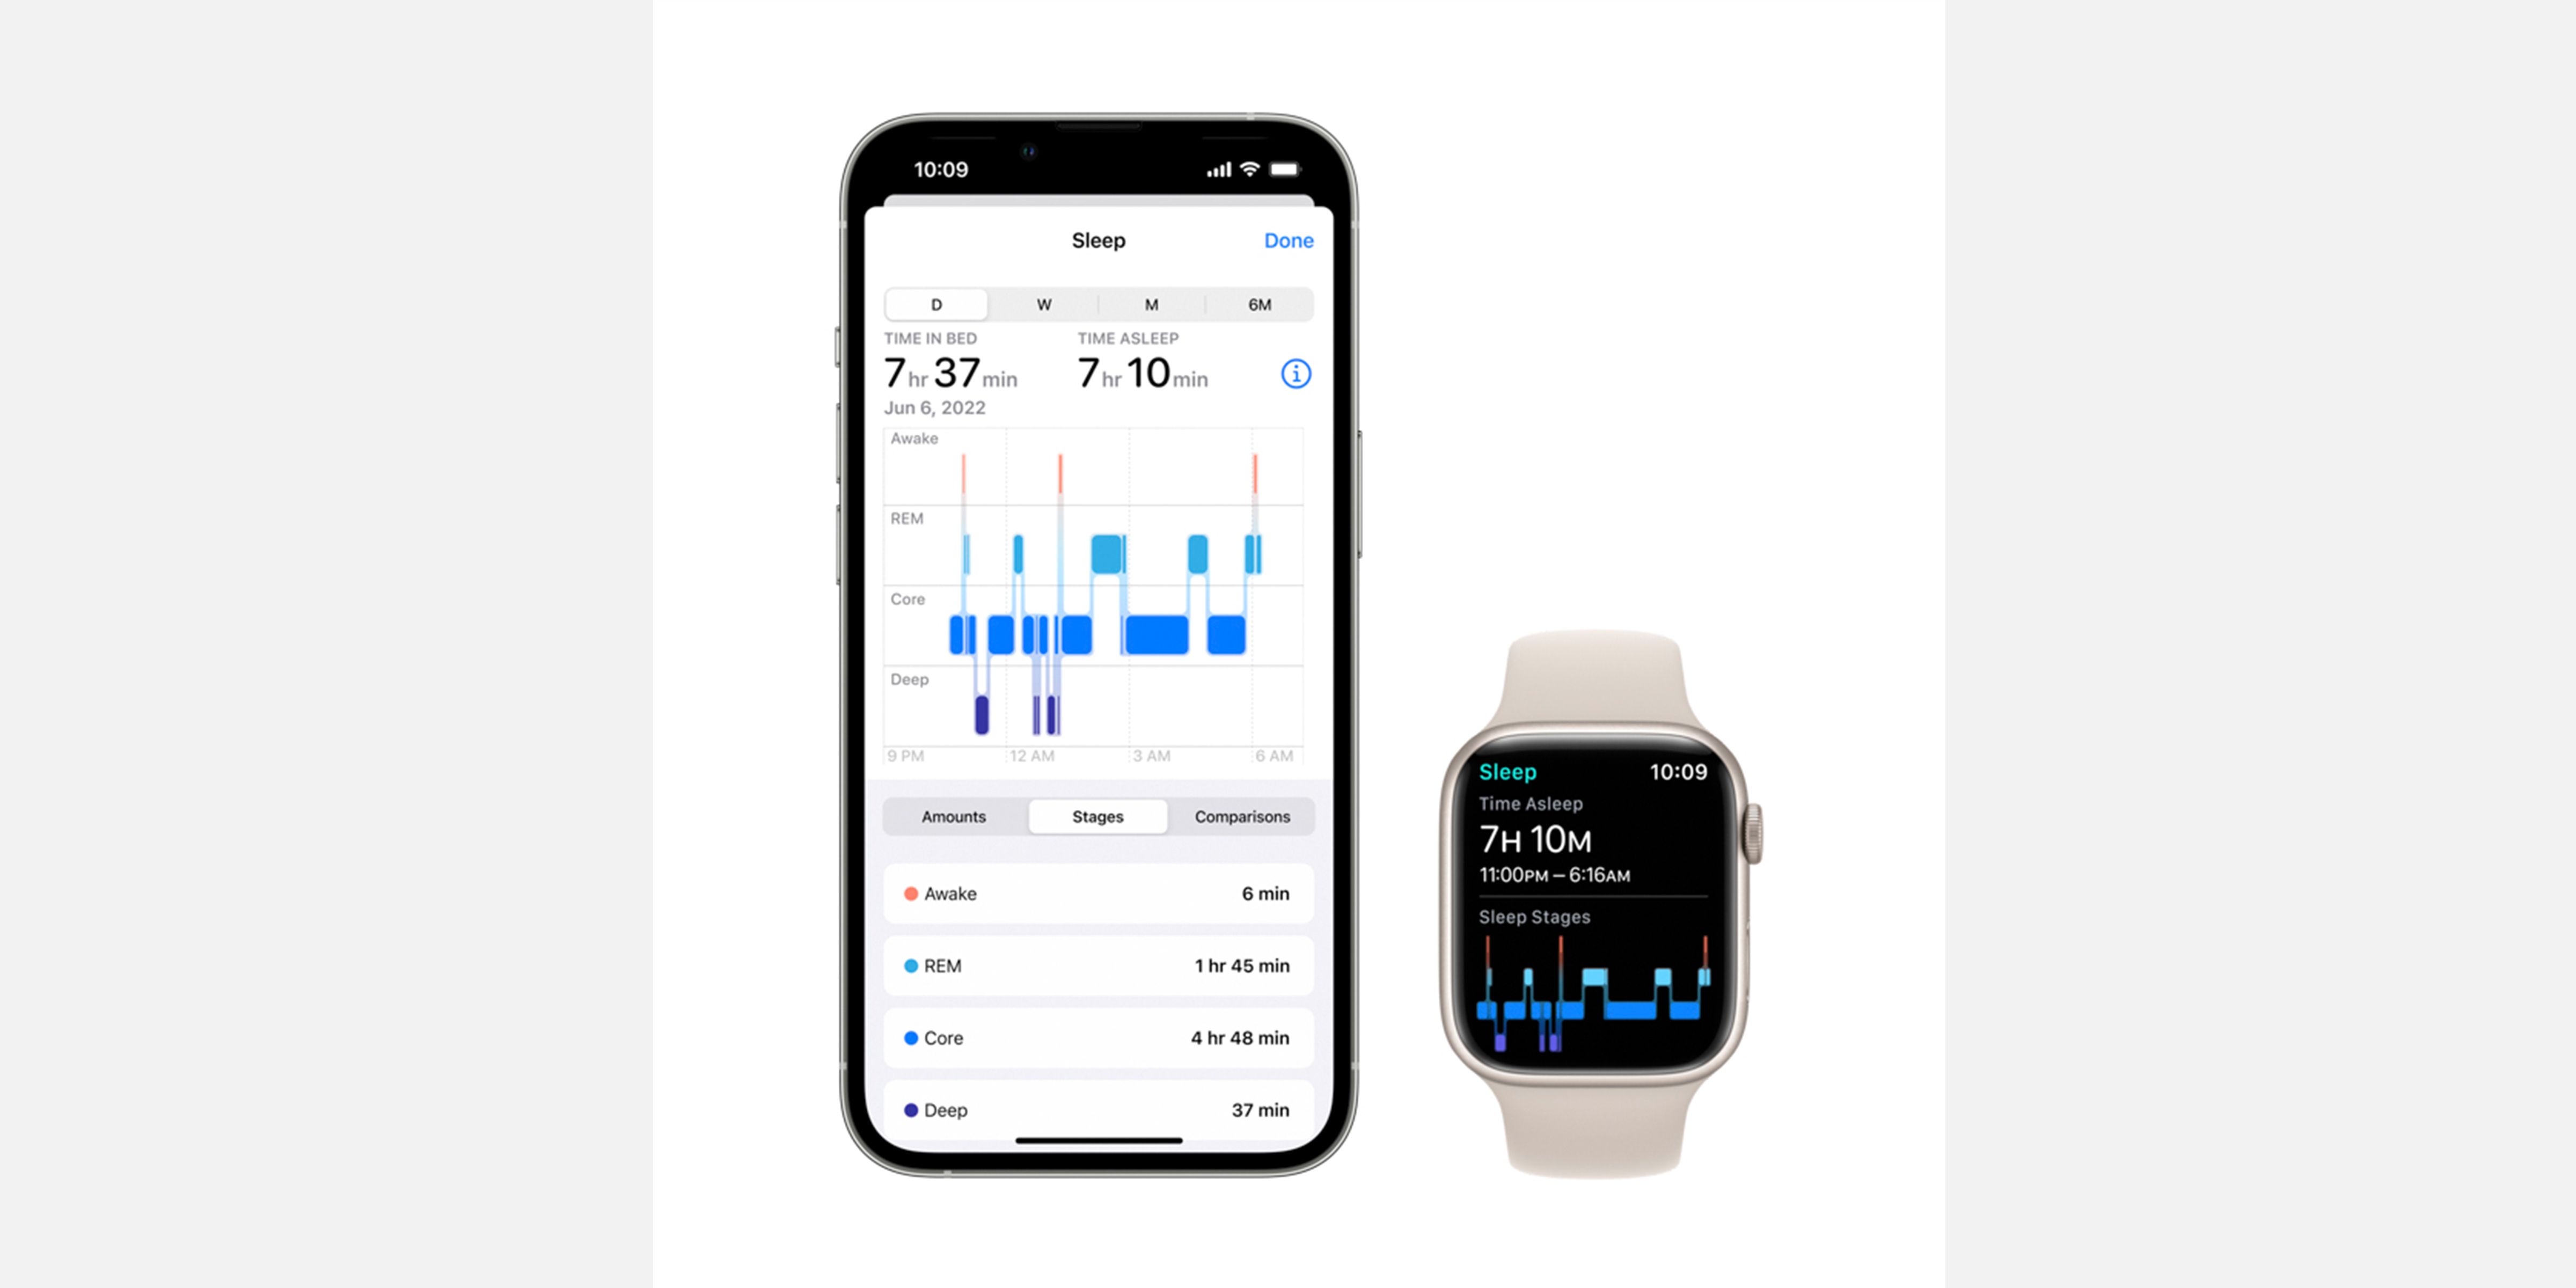 Apple iPhone and Apple Watch display showing the Apple Sleep Stages feature